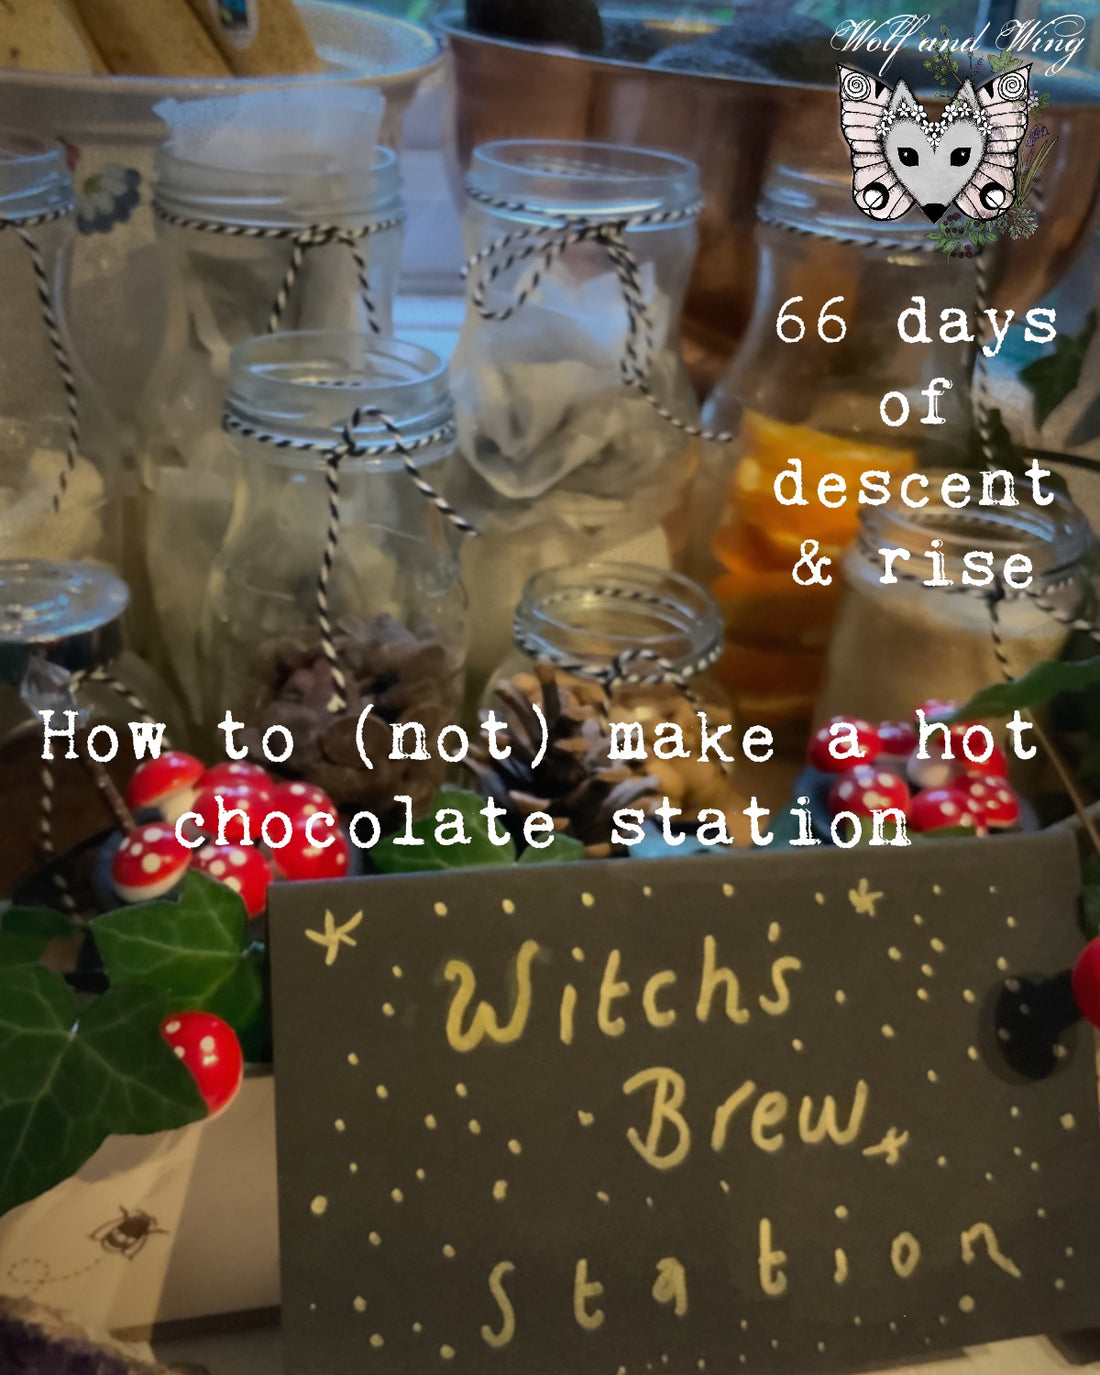 Day 23. Ascending to Imbolc. How to (not) make a hot chocolate station!